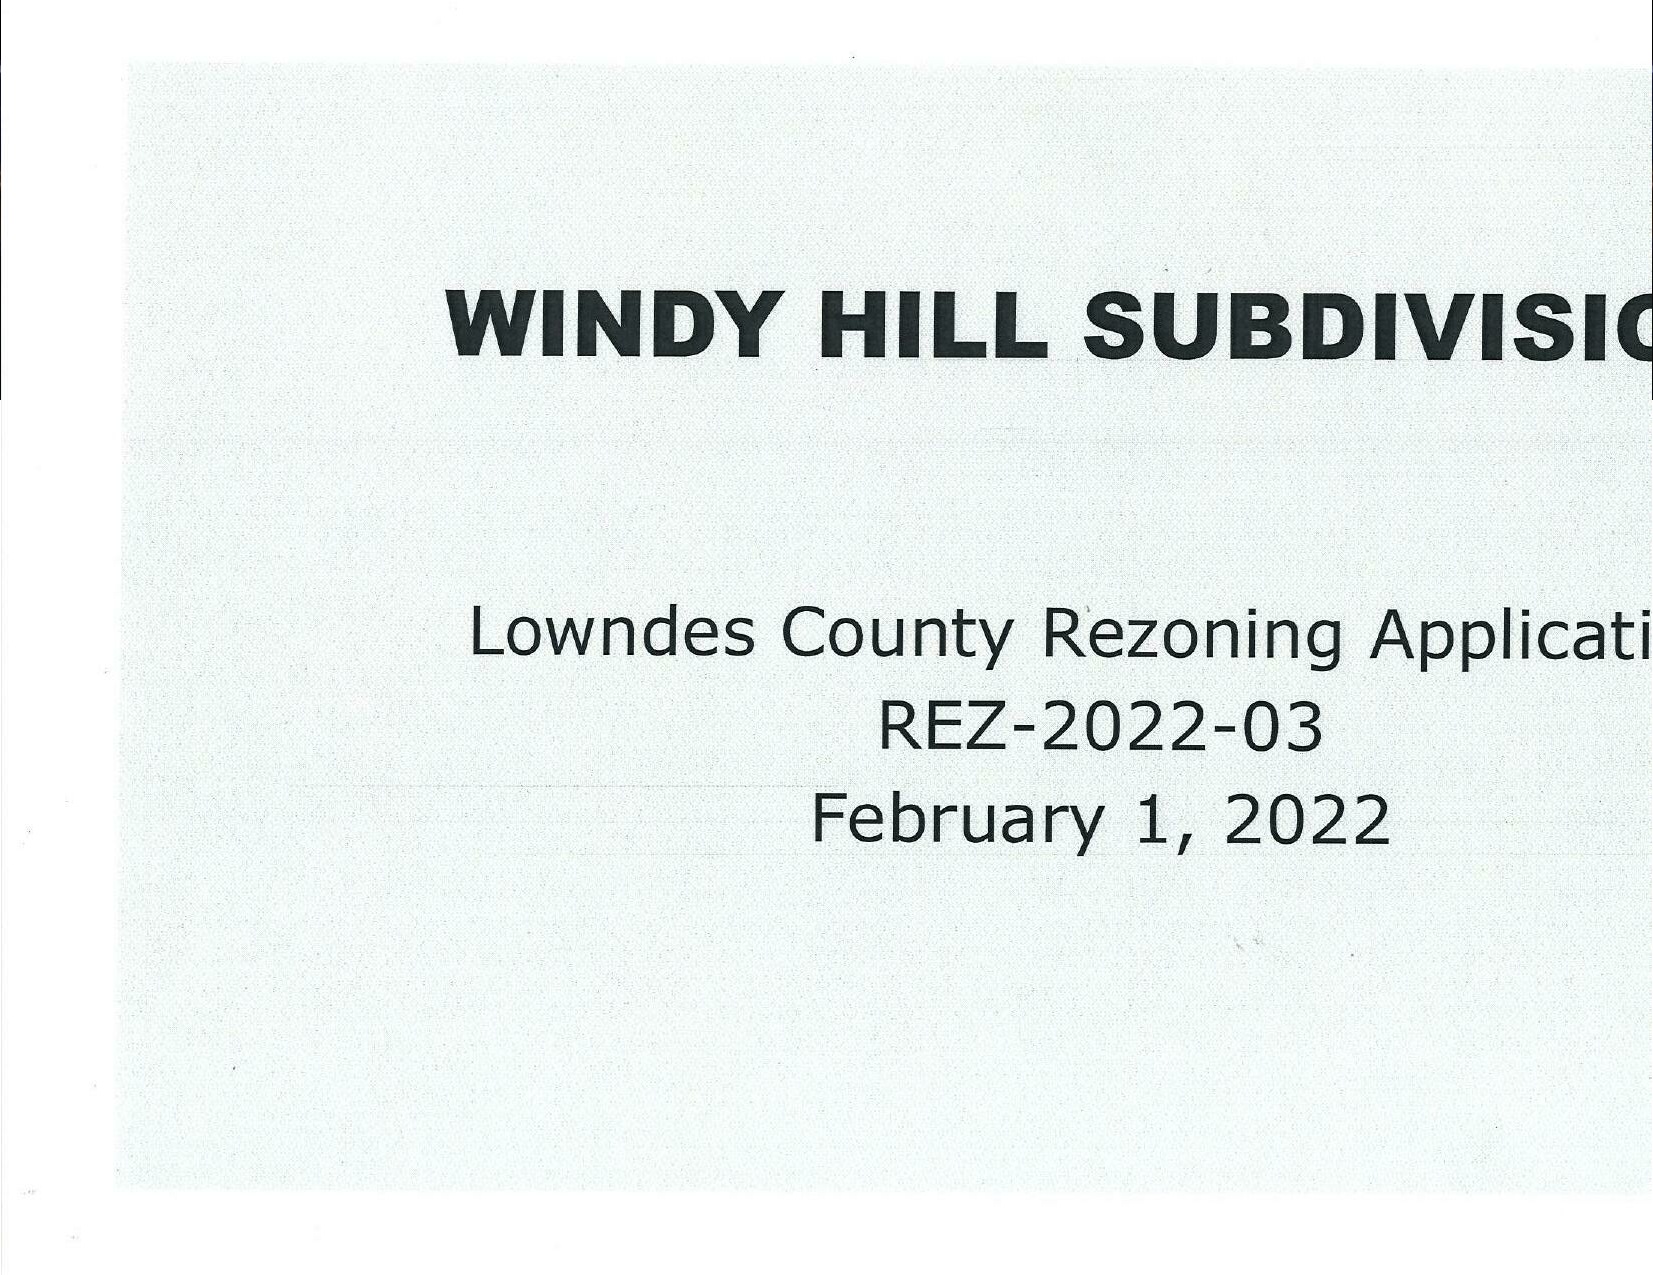 WINDY HILL SUBDIVISION, Lowndes County Rezoning Application, REZ-2022-03